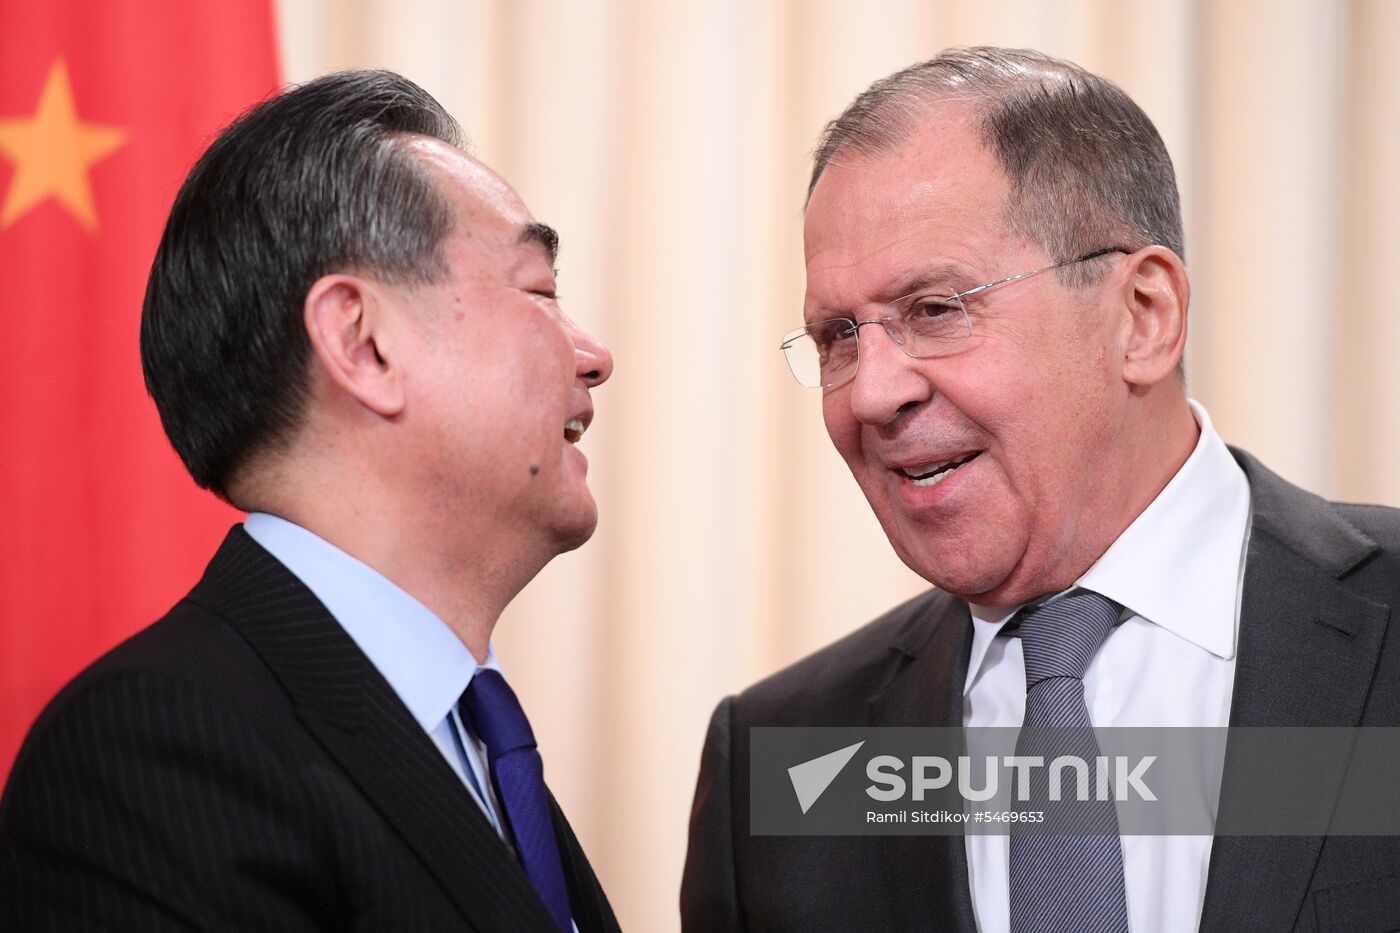 Meeting of Russian and Chinese Foreign Ministers Sergei Lavrov and Wang Yi